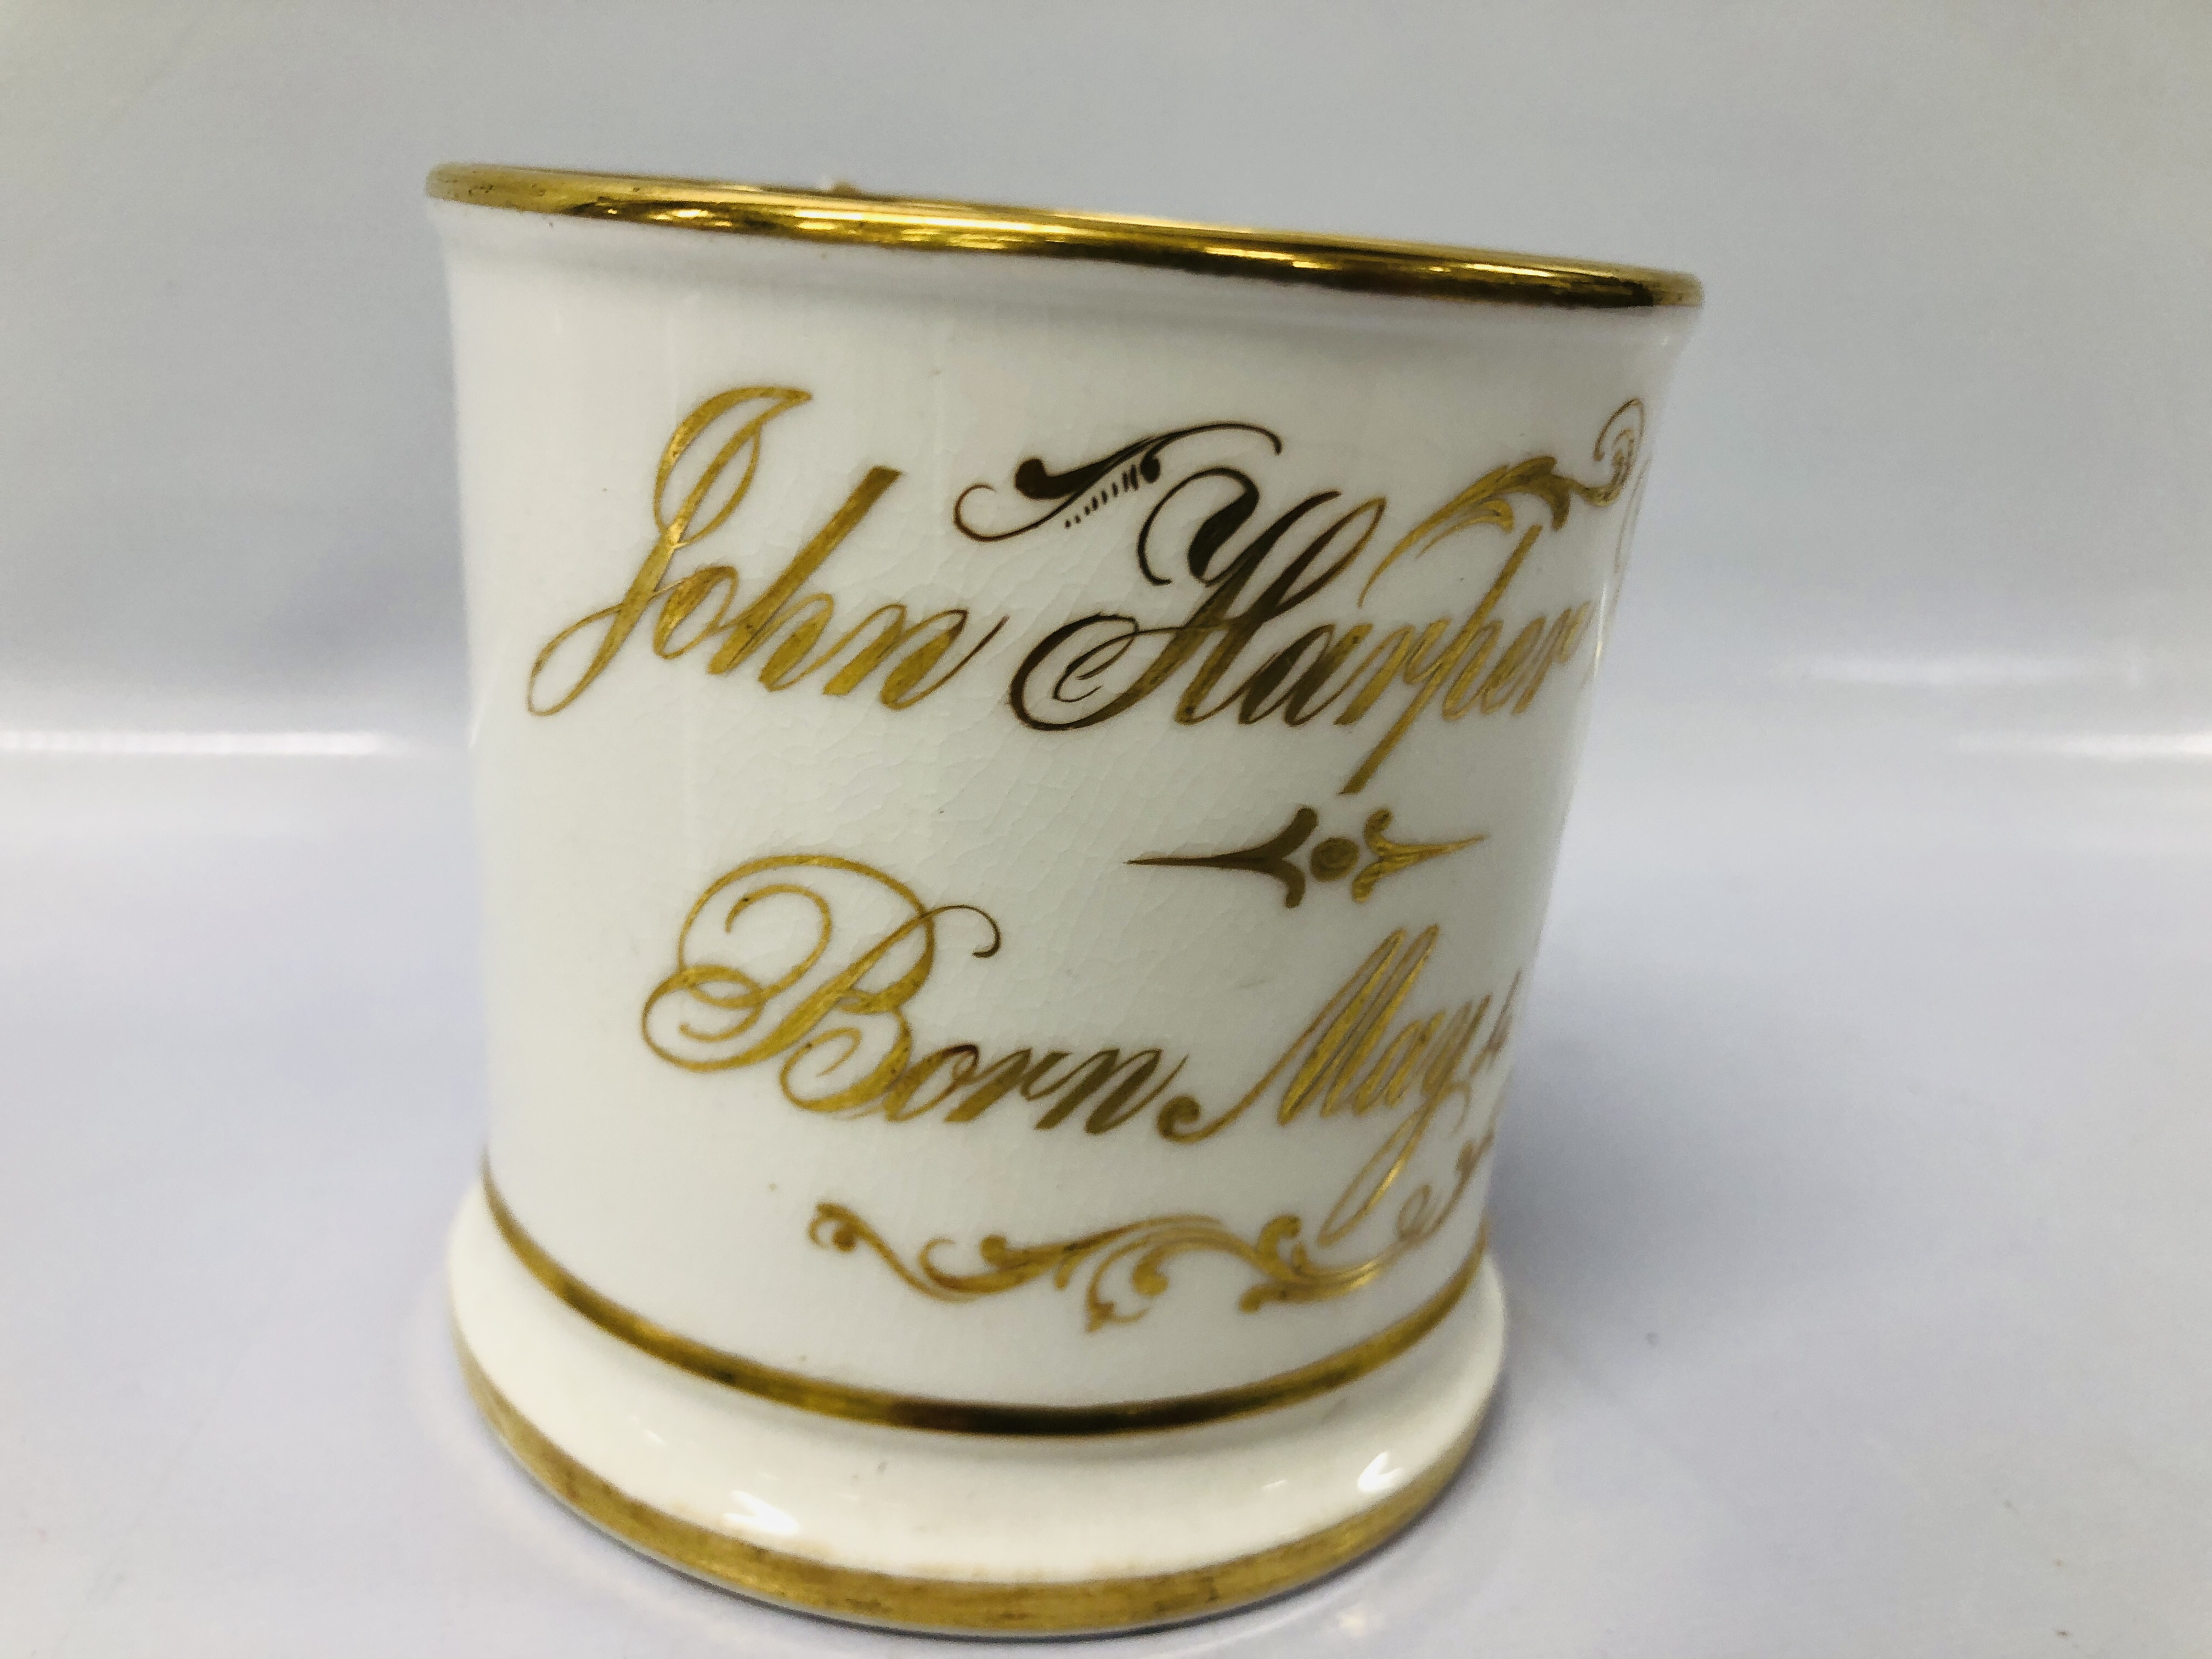 VINTAGE "DAVENPORT" MUG HANDPAINTED WITH FLOEWRS AND LAKE SCENE ALONG WITH A CREAM WARE CHRISTENING - Image 7 of 9